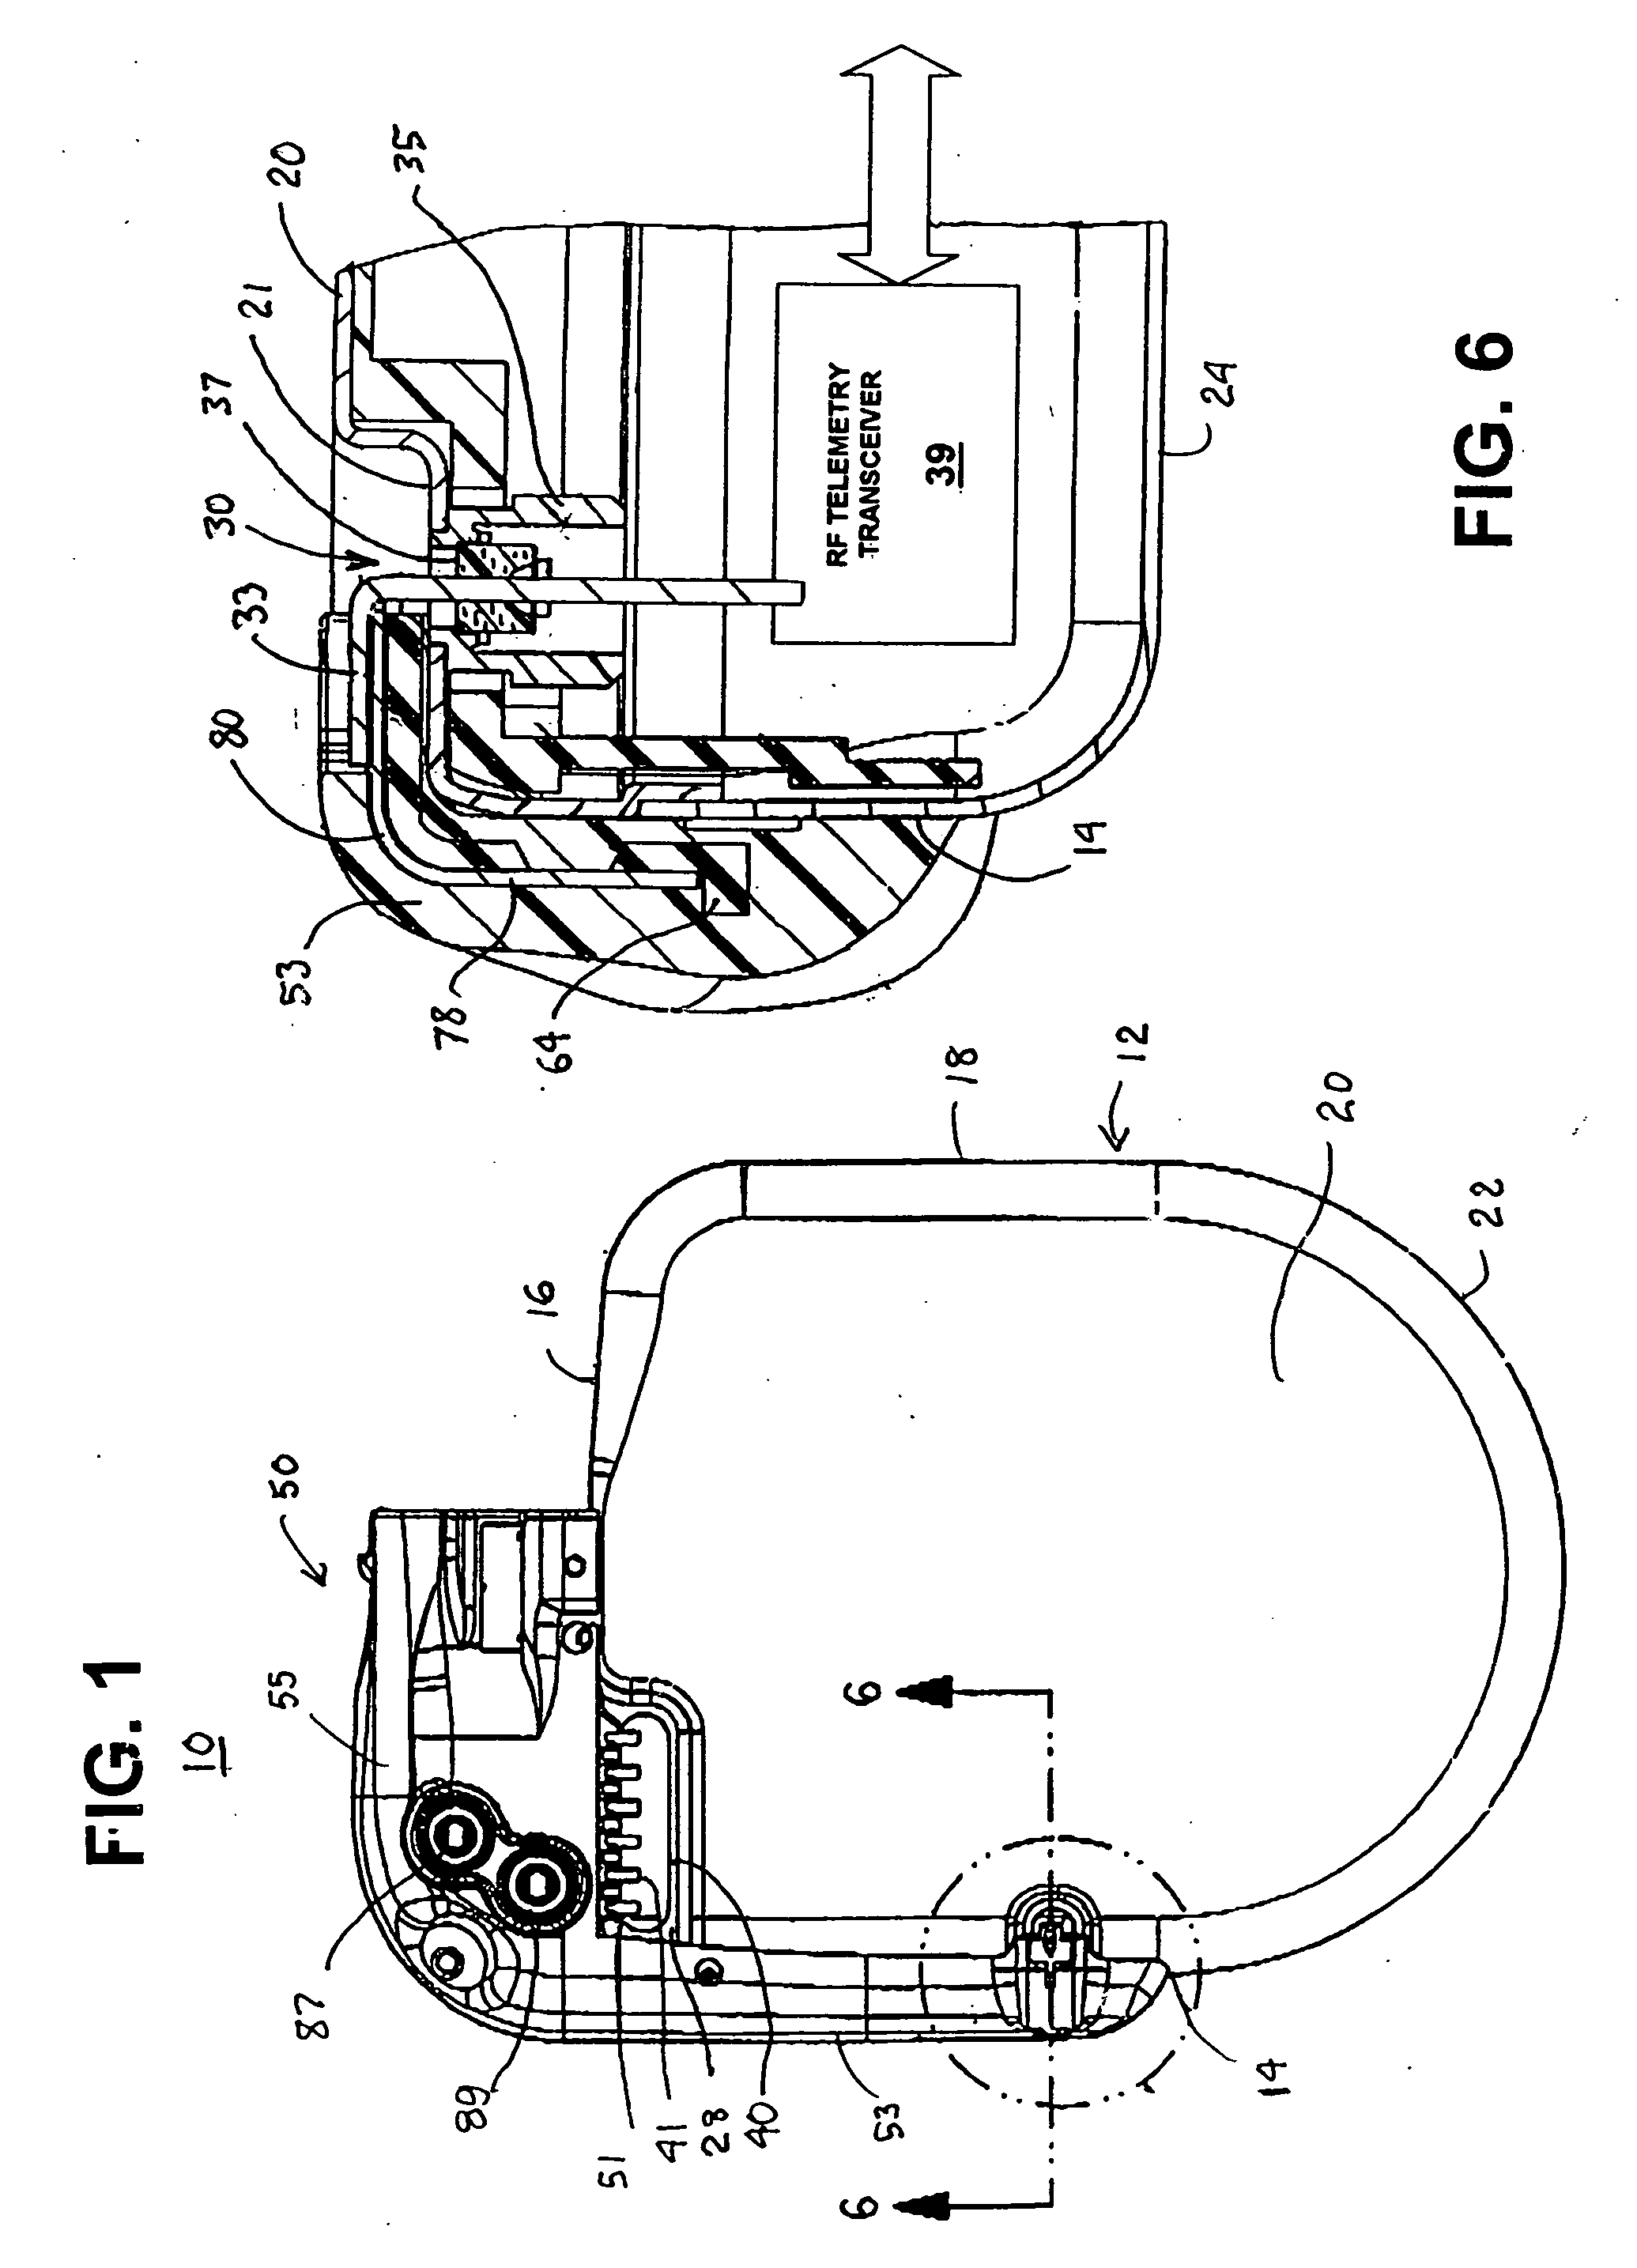 Telemetry antenna for an implantable medical device